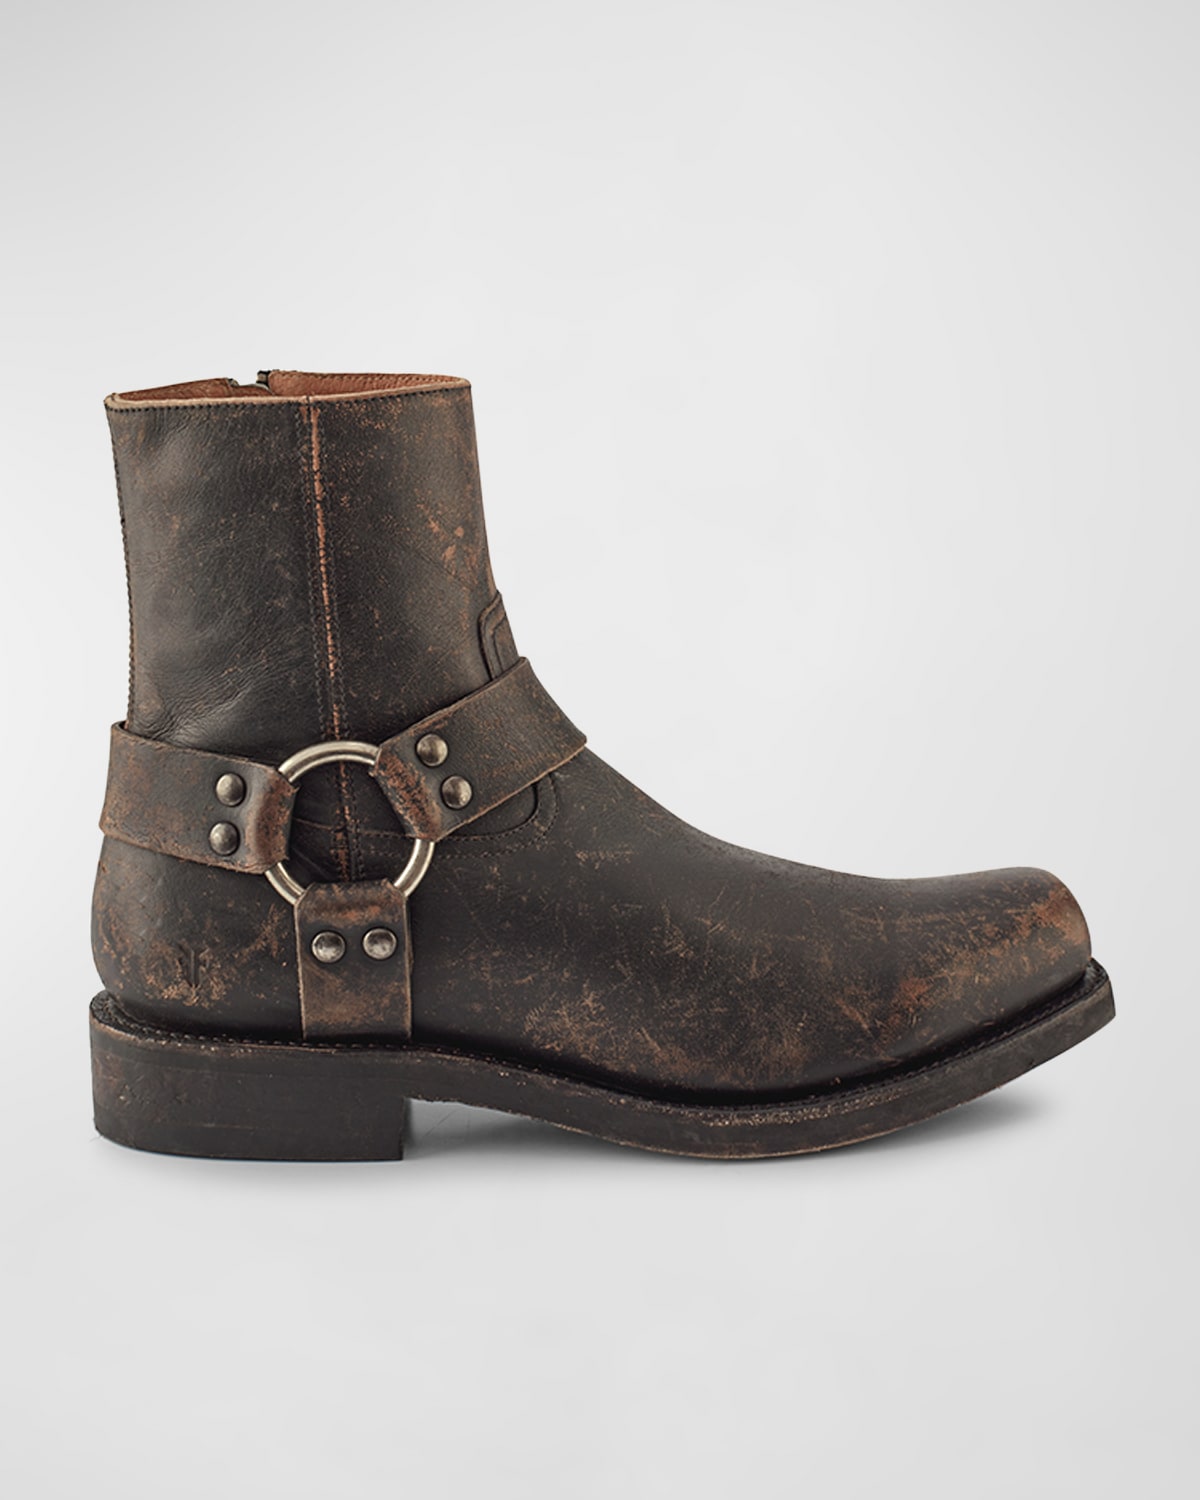 FRYE MEN'S CONWAY HARNESS LEATHER BOOTS